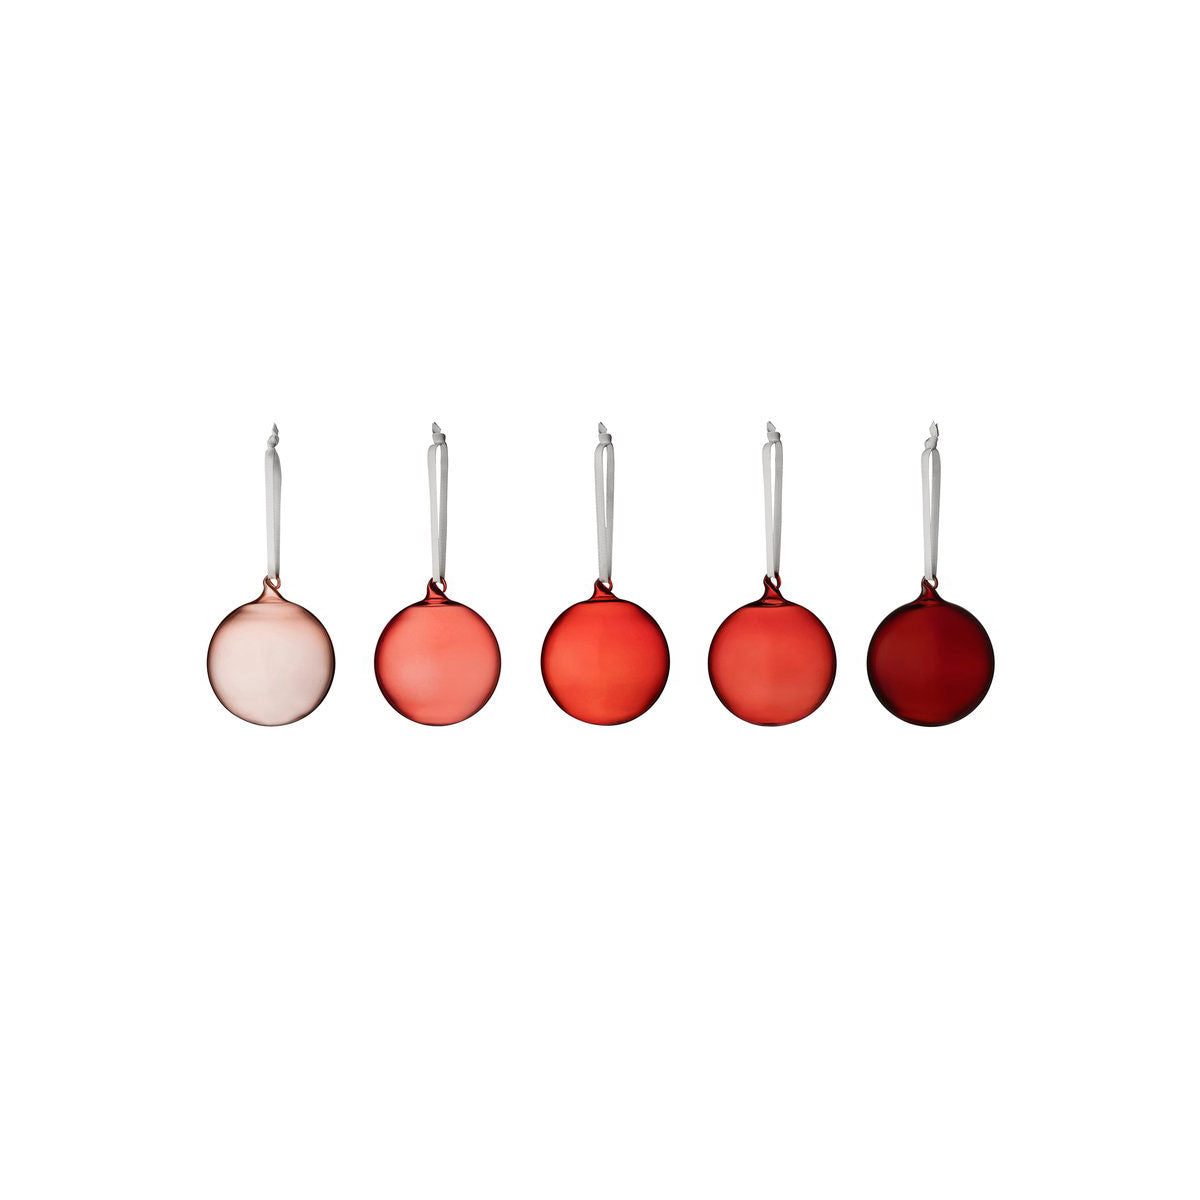 Iittala Glass Ball, 1.5 inches, Set of 5, Red, Mouthblown Glass